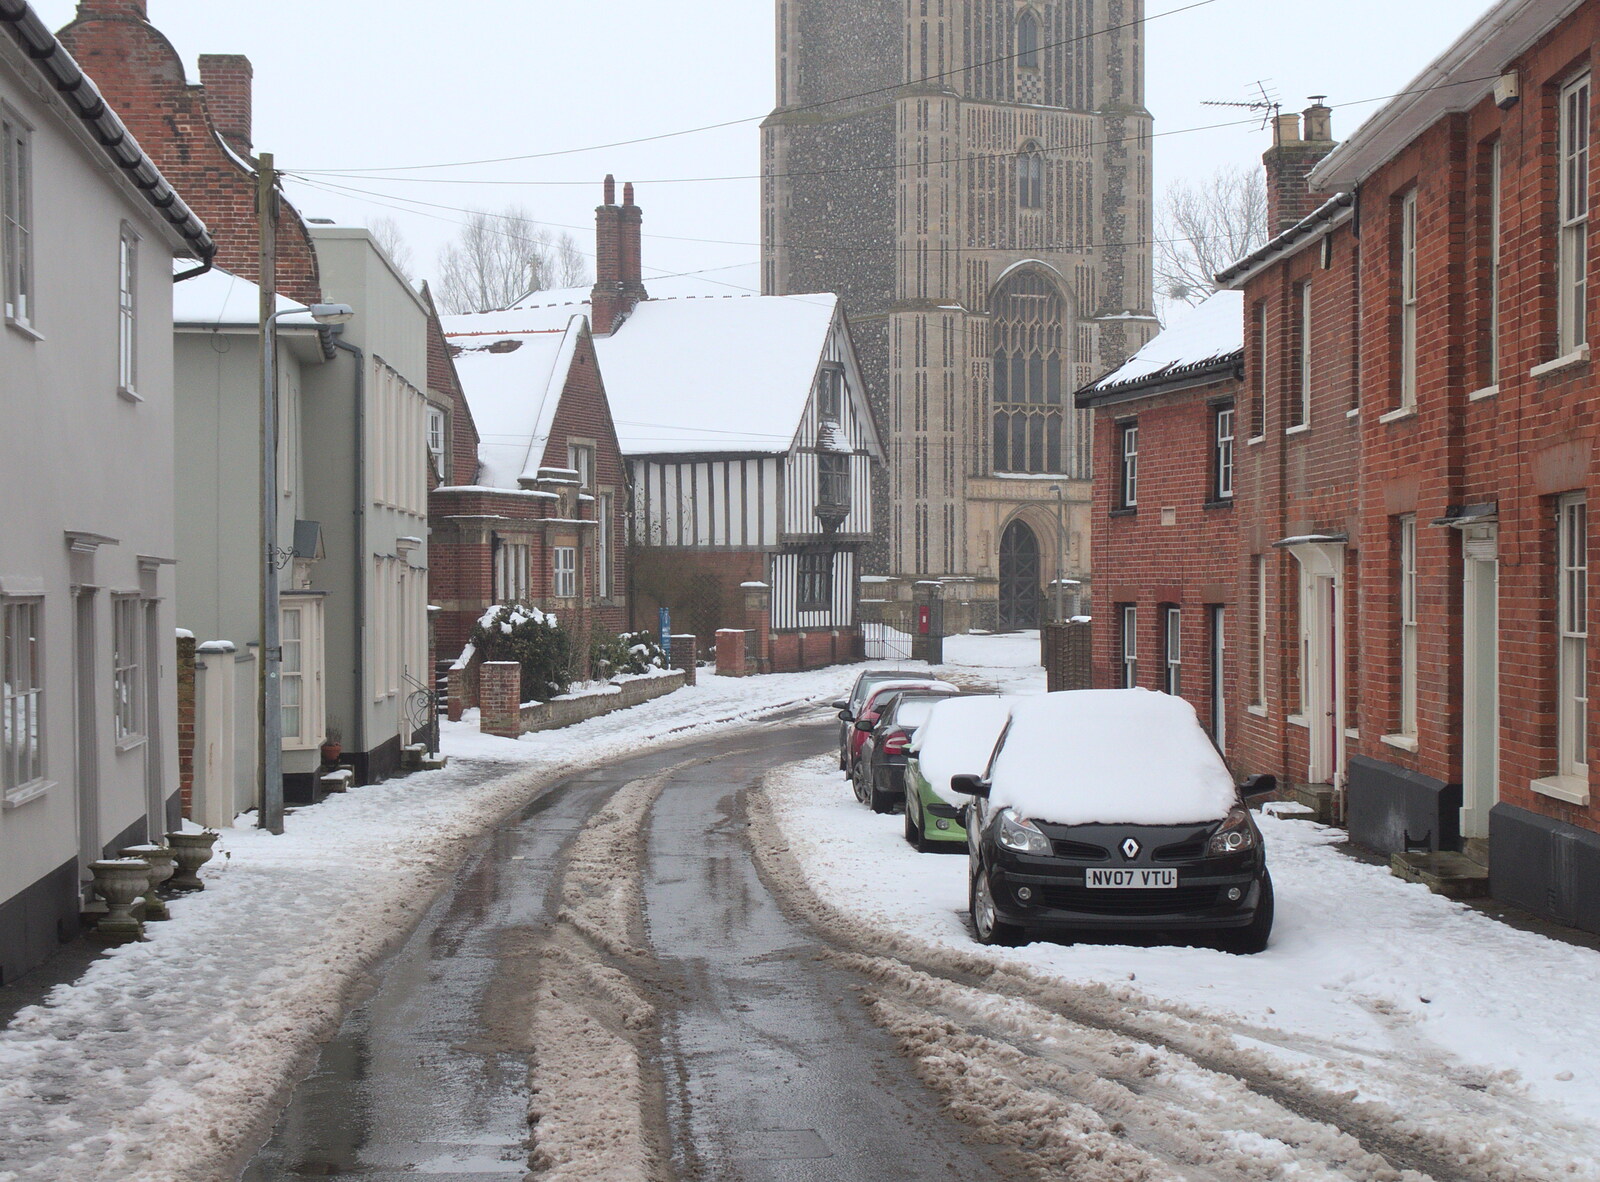 Church Street, looking back towards the church  from More March Snow and a Postcard from Diss, Norfolk - 3rd March 2018